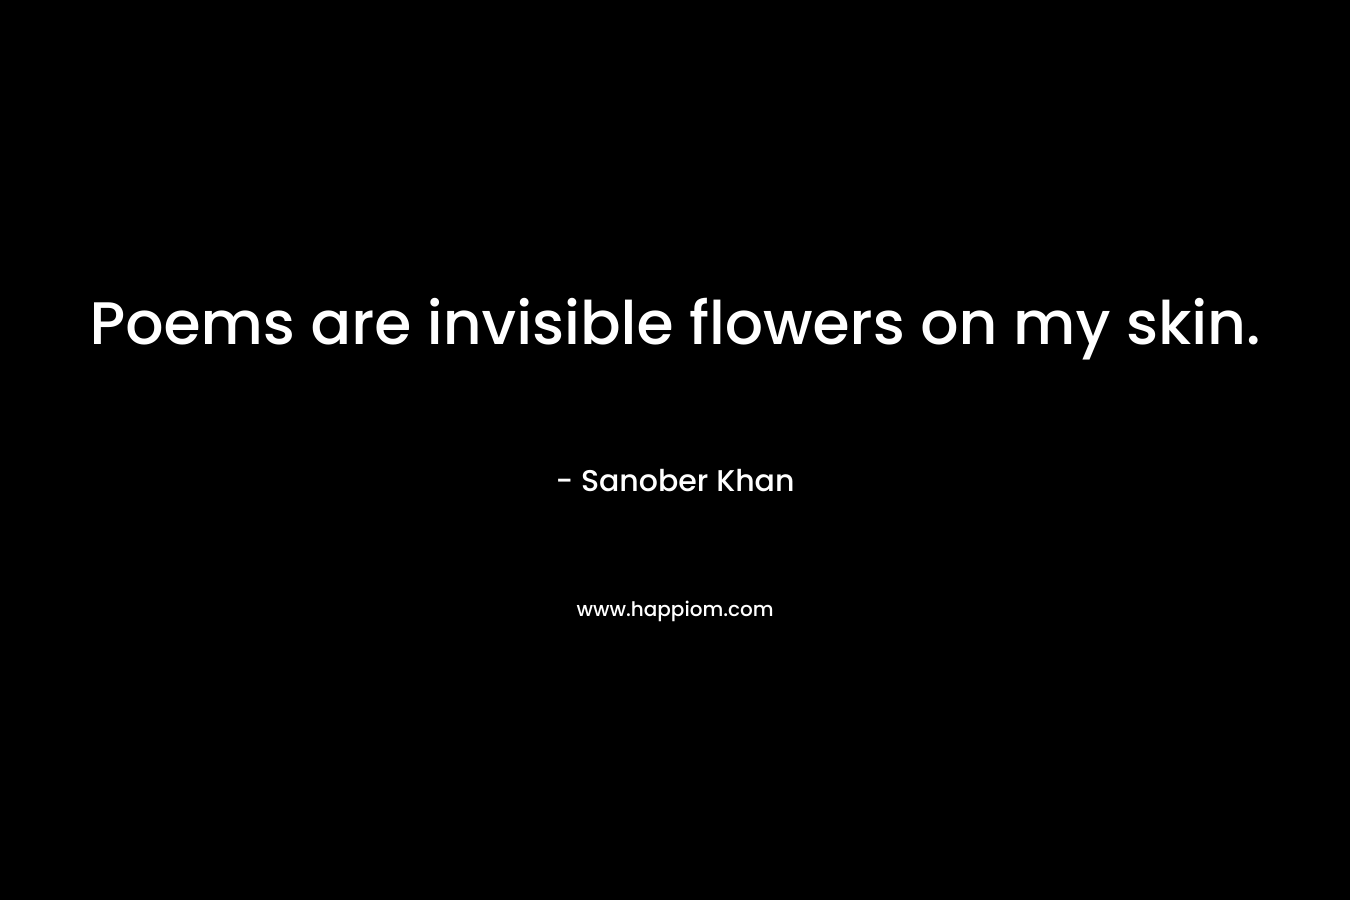 Poems are invisible flowers on my skin.